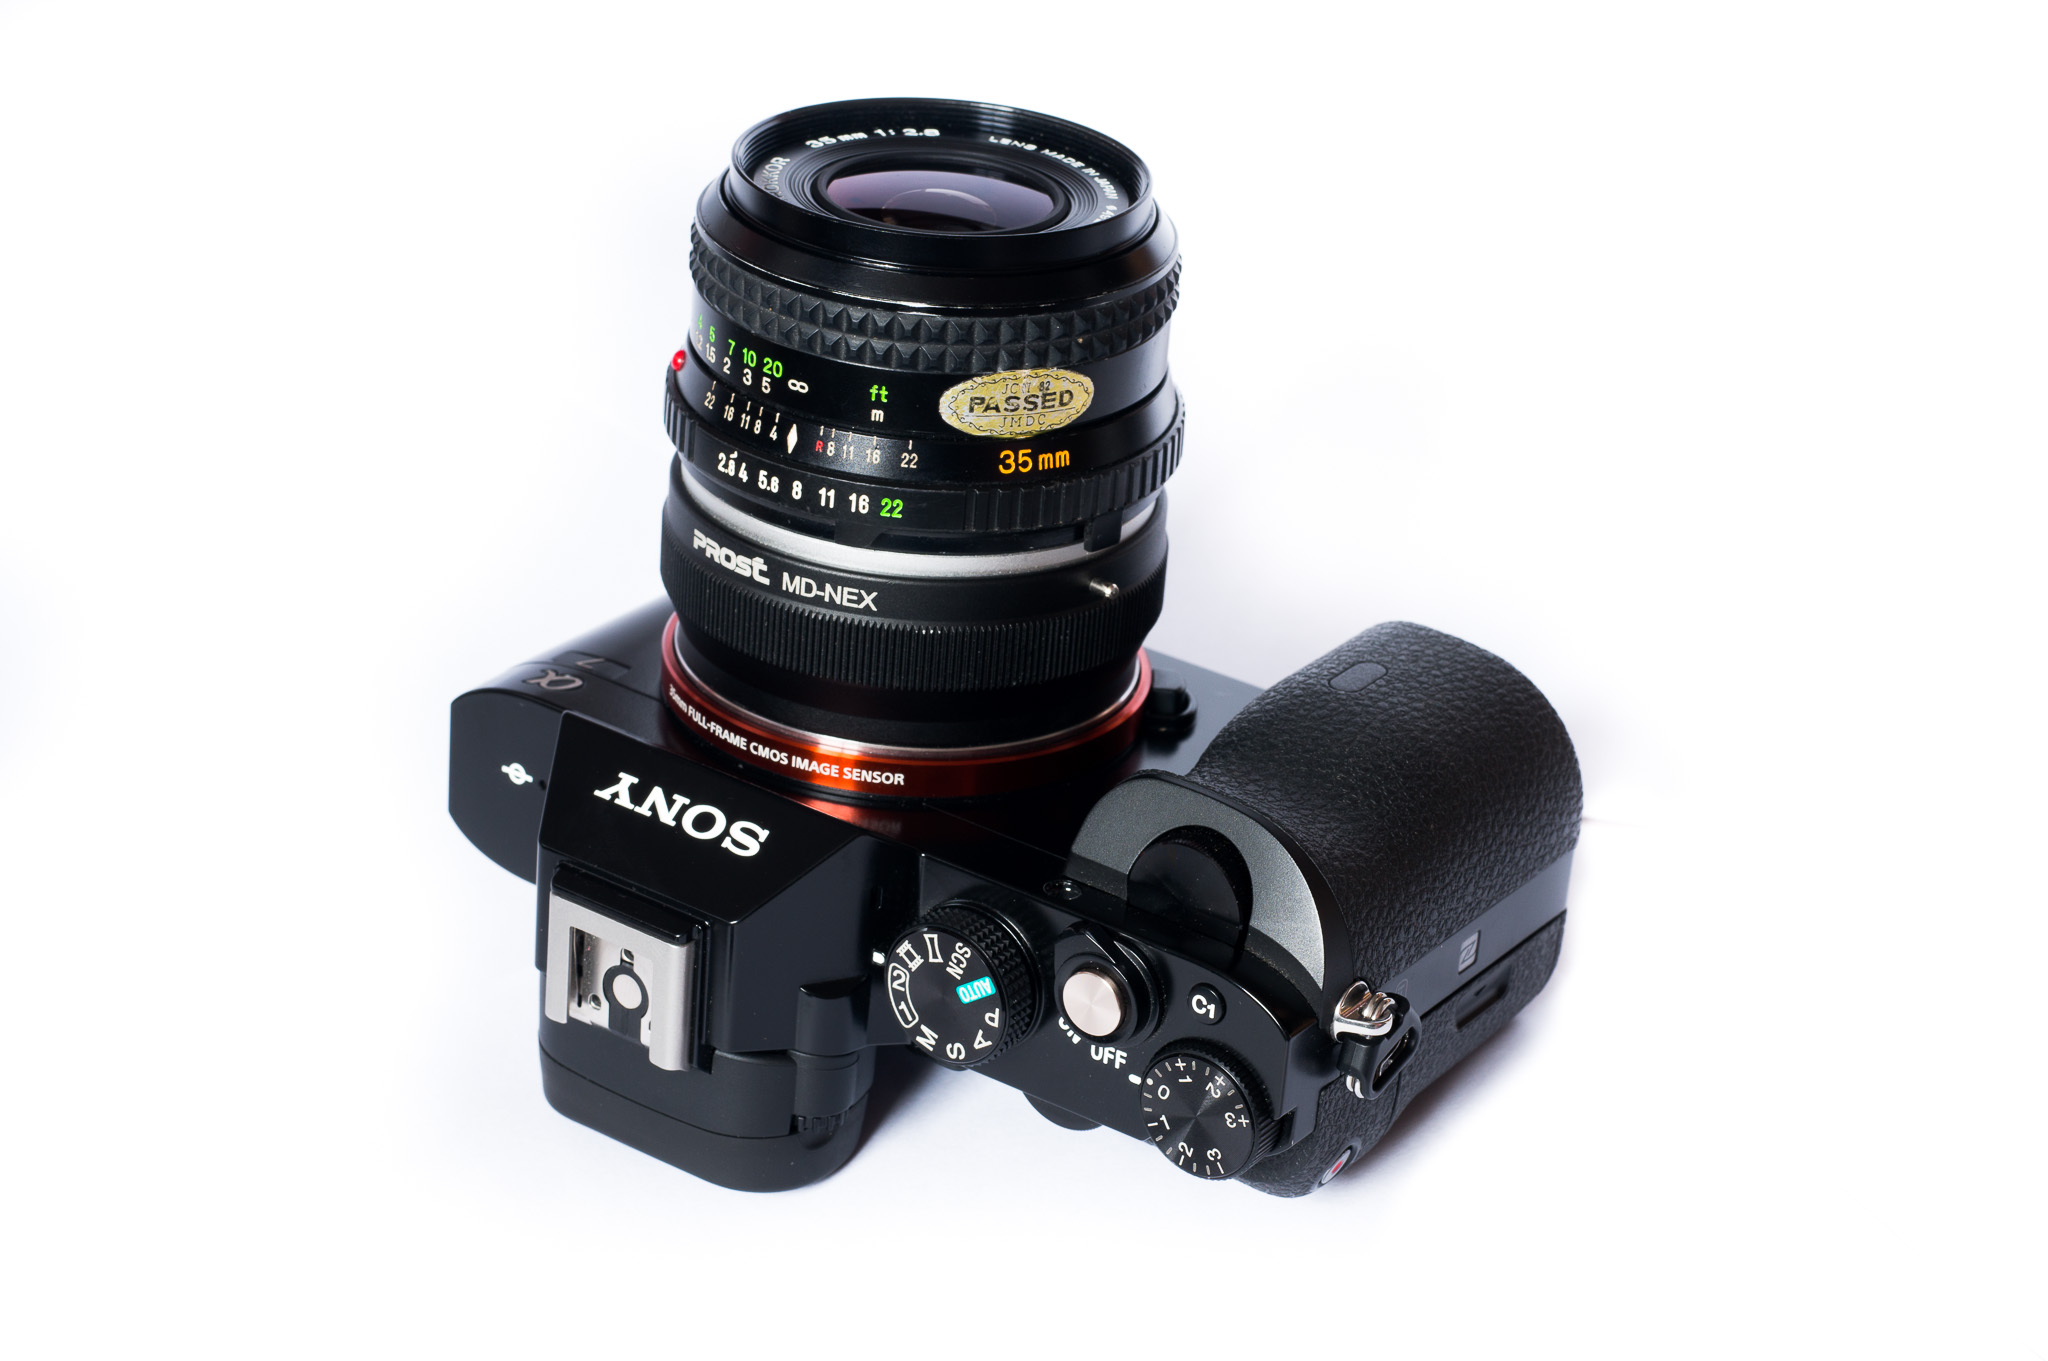 A $400 lens kit for your Sony a7 series camera - phillipreeve.net